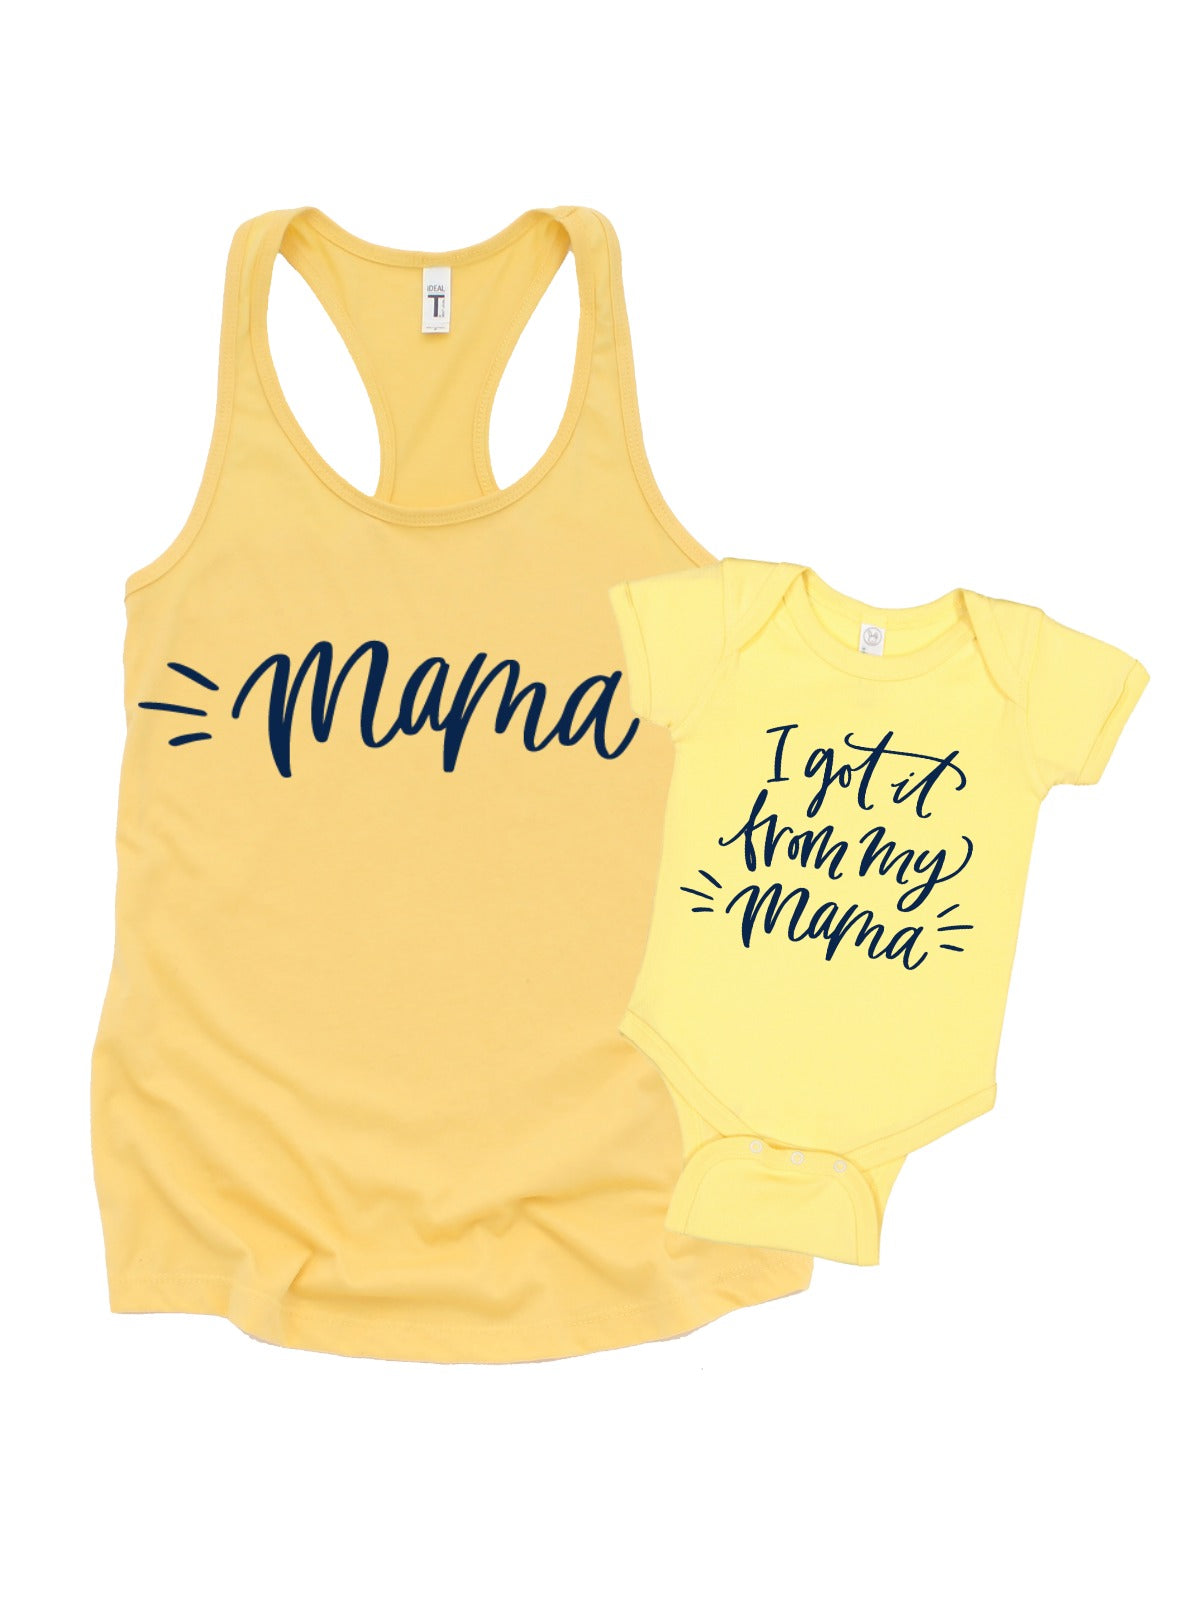 matching mommy and me tank top set I got it from my mama